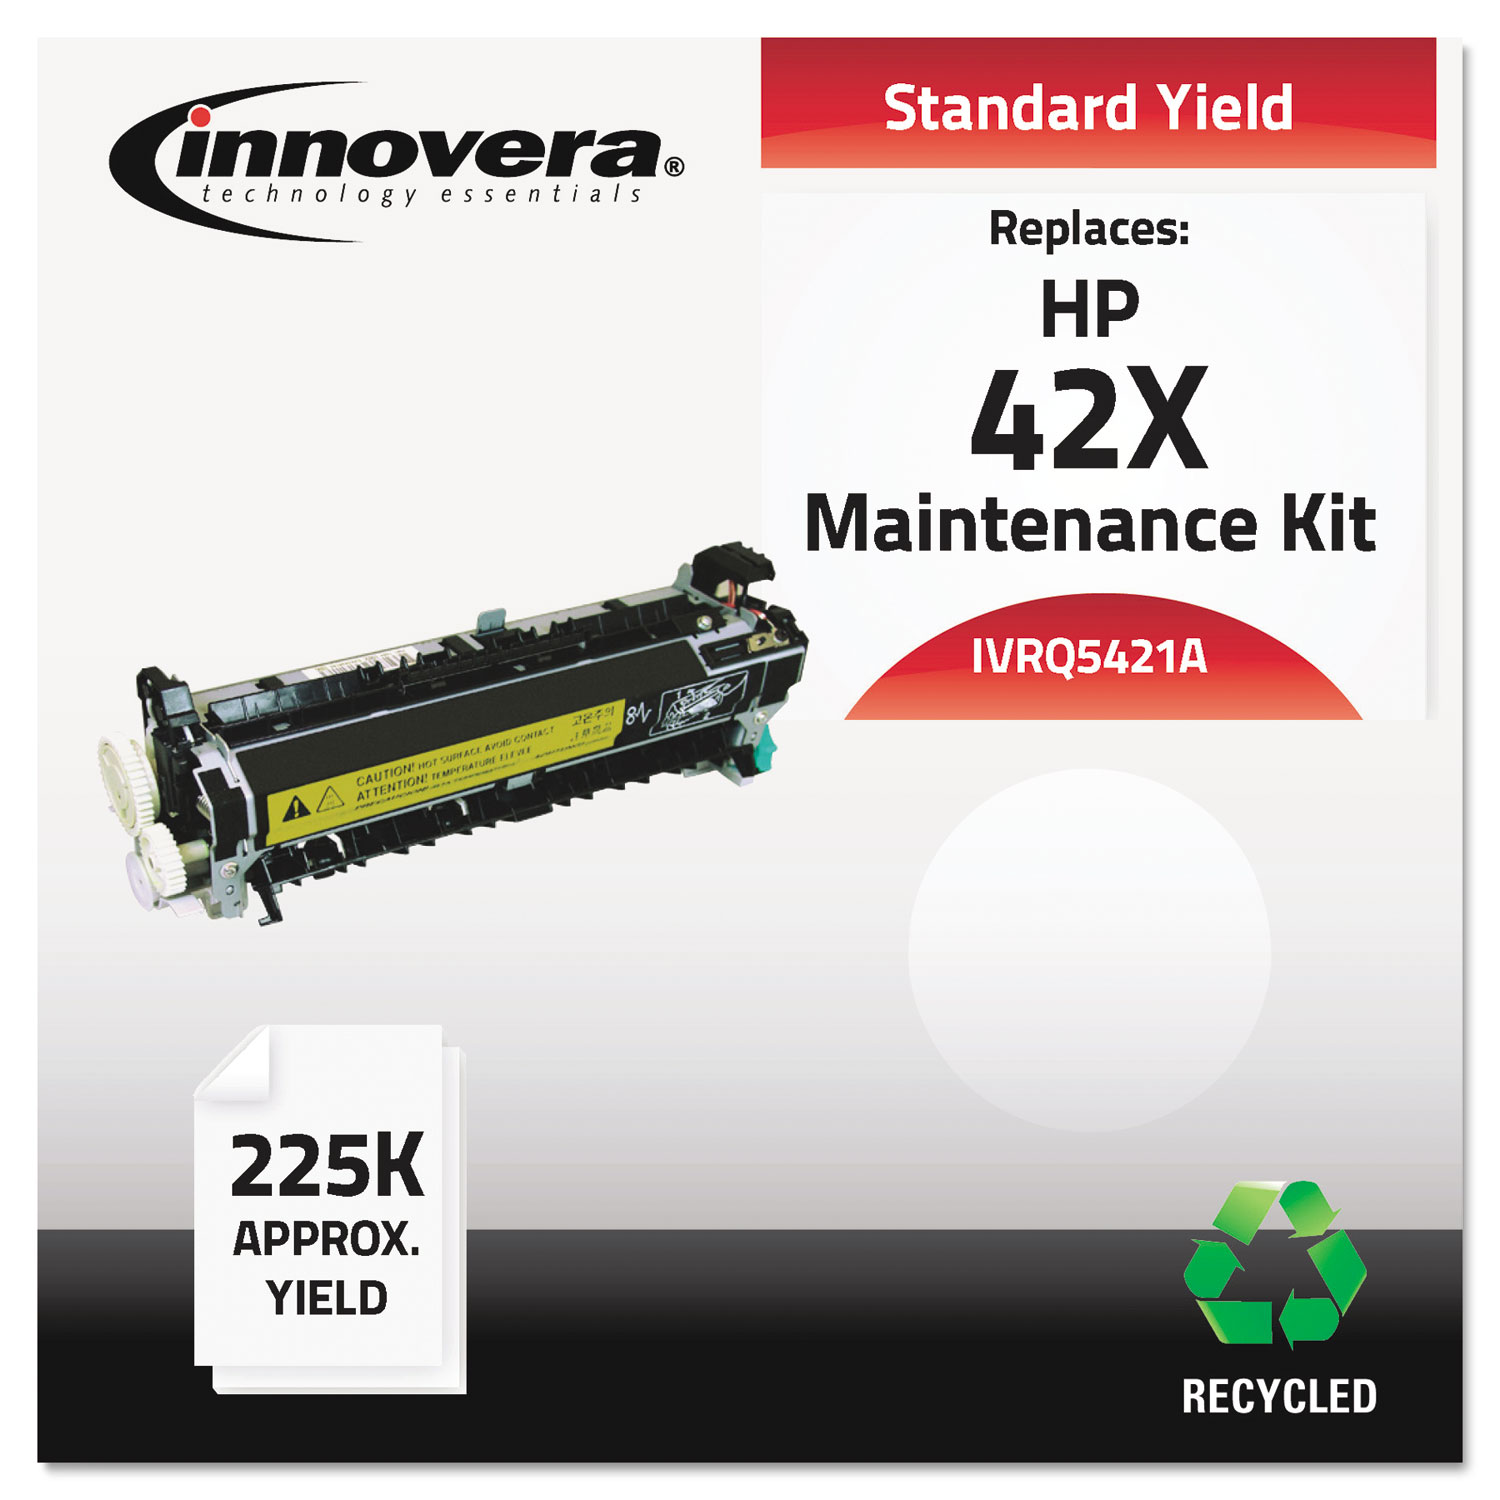  Innovera IVRQ5421A Remanufactured Q5421-67903 (4250) Maintenance Kit, 225000 Page-Yield, (IVRQ5421A) 